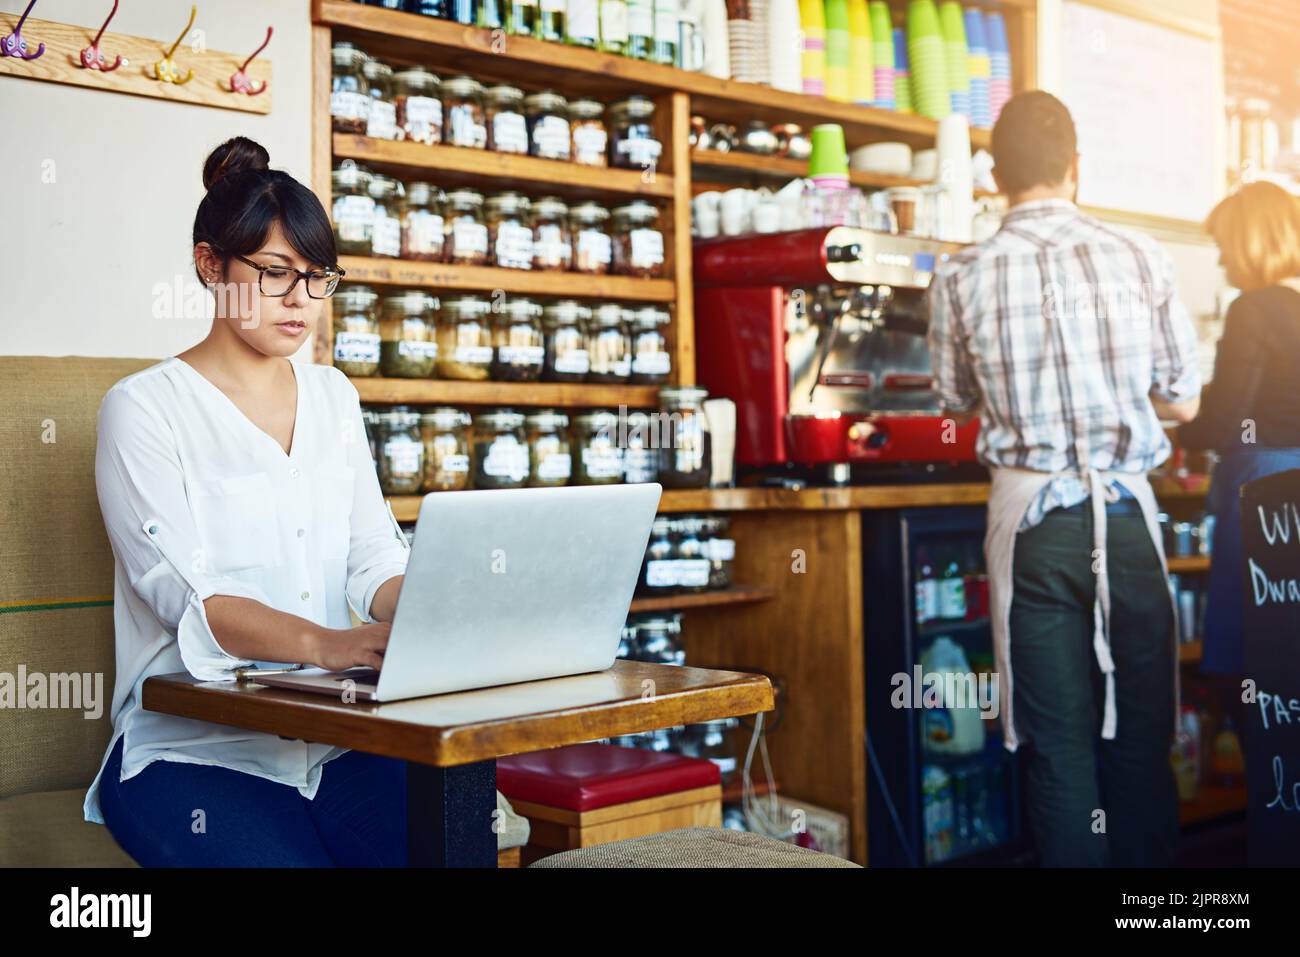 Coffee and connectivity is all I need. a beautiful young woman using a laptop in a cafe. Stock Photo